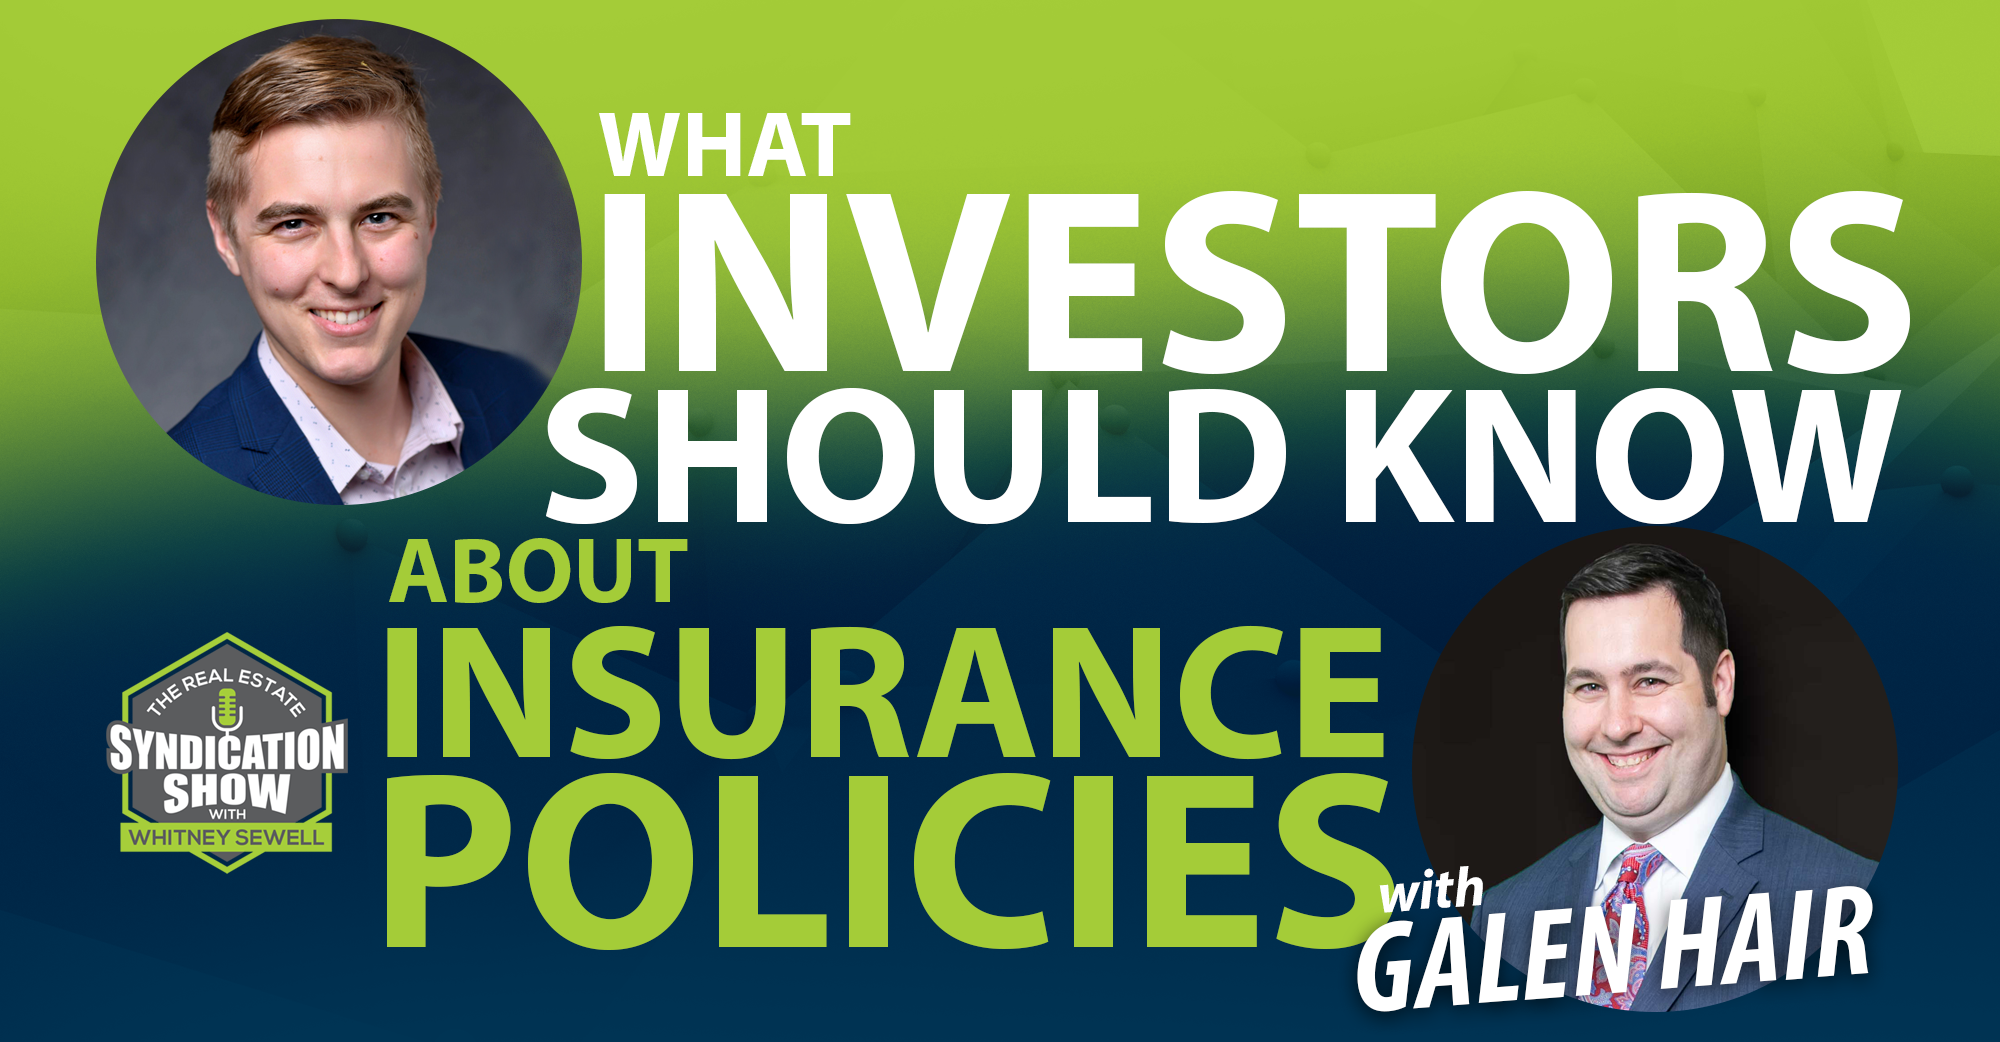 What Investors Should Know About Insurance Policies with Galen Hair